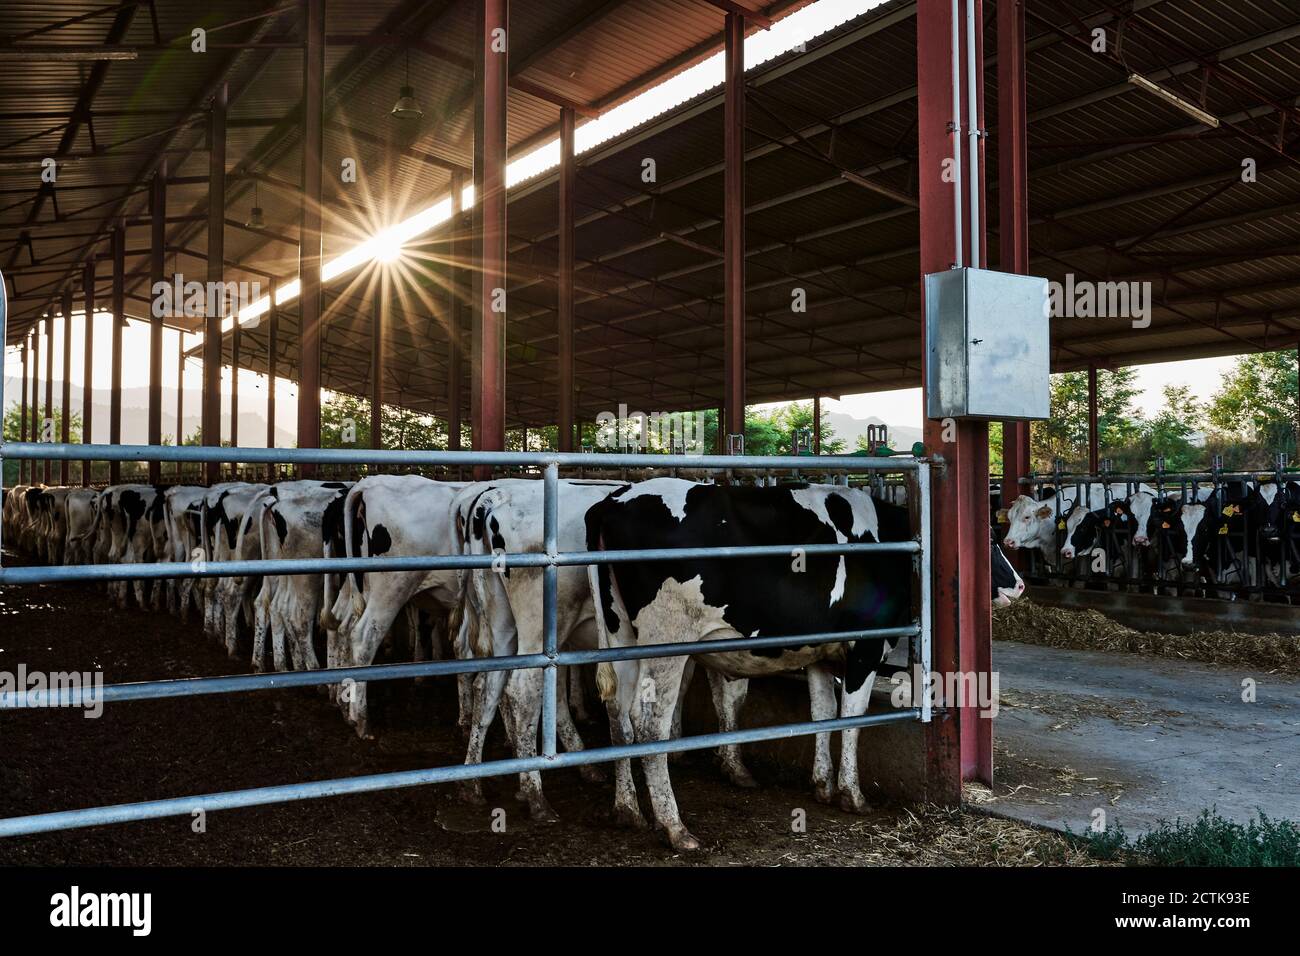 Herd of cow standing inside barn in shed at farm Stock Photo